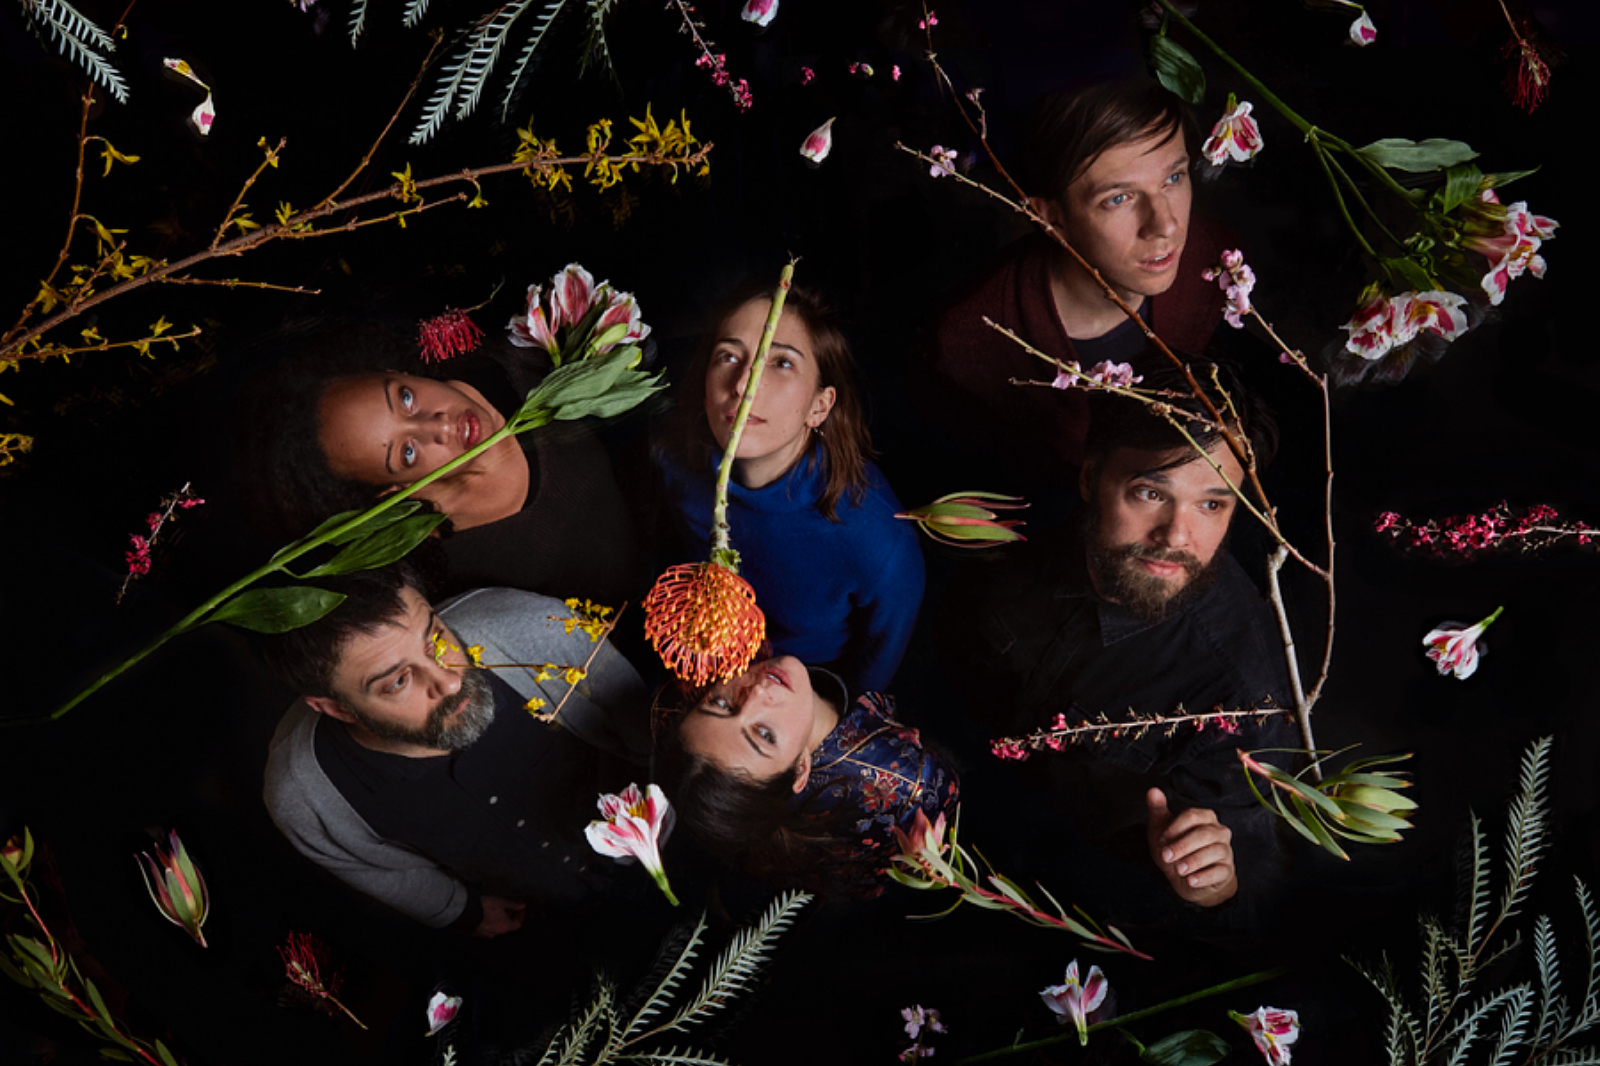 Dirty Projectors announce new album ft Haim, Rostam, Robin Pecknold (Fleet Foxes) and more